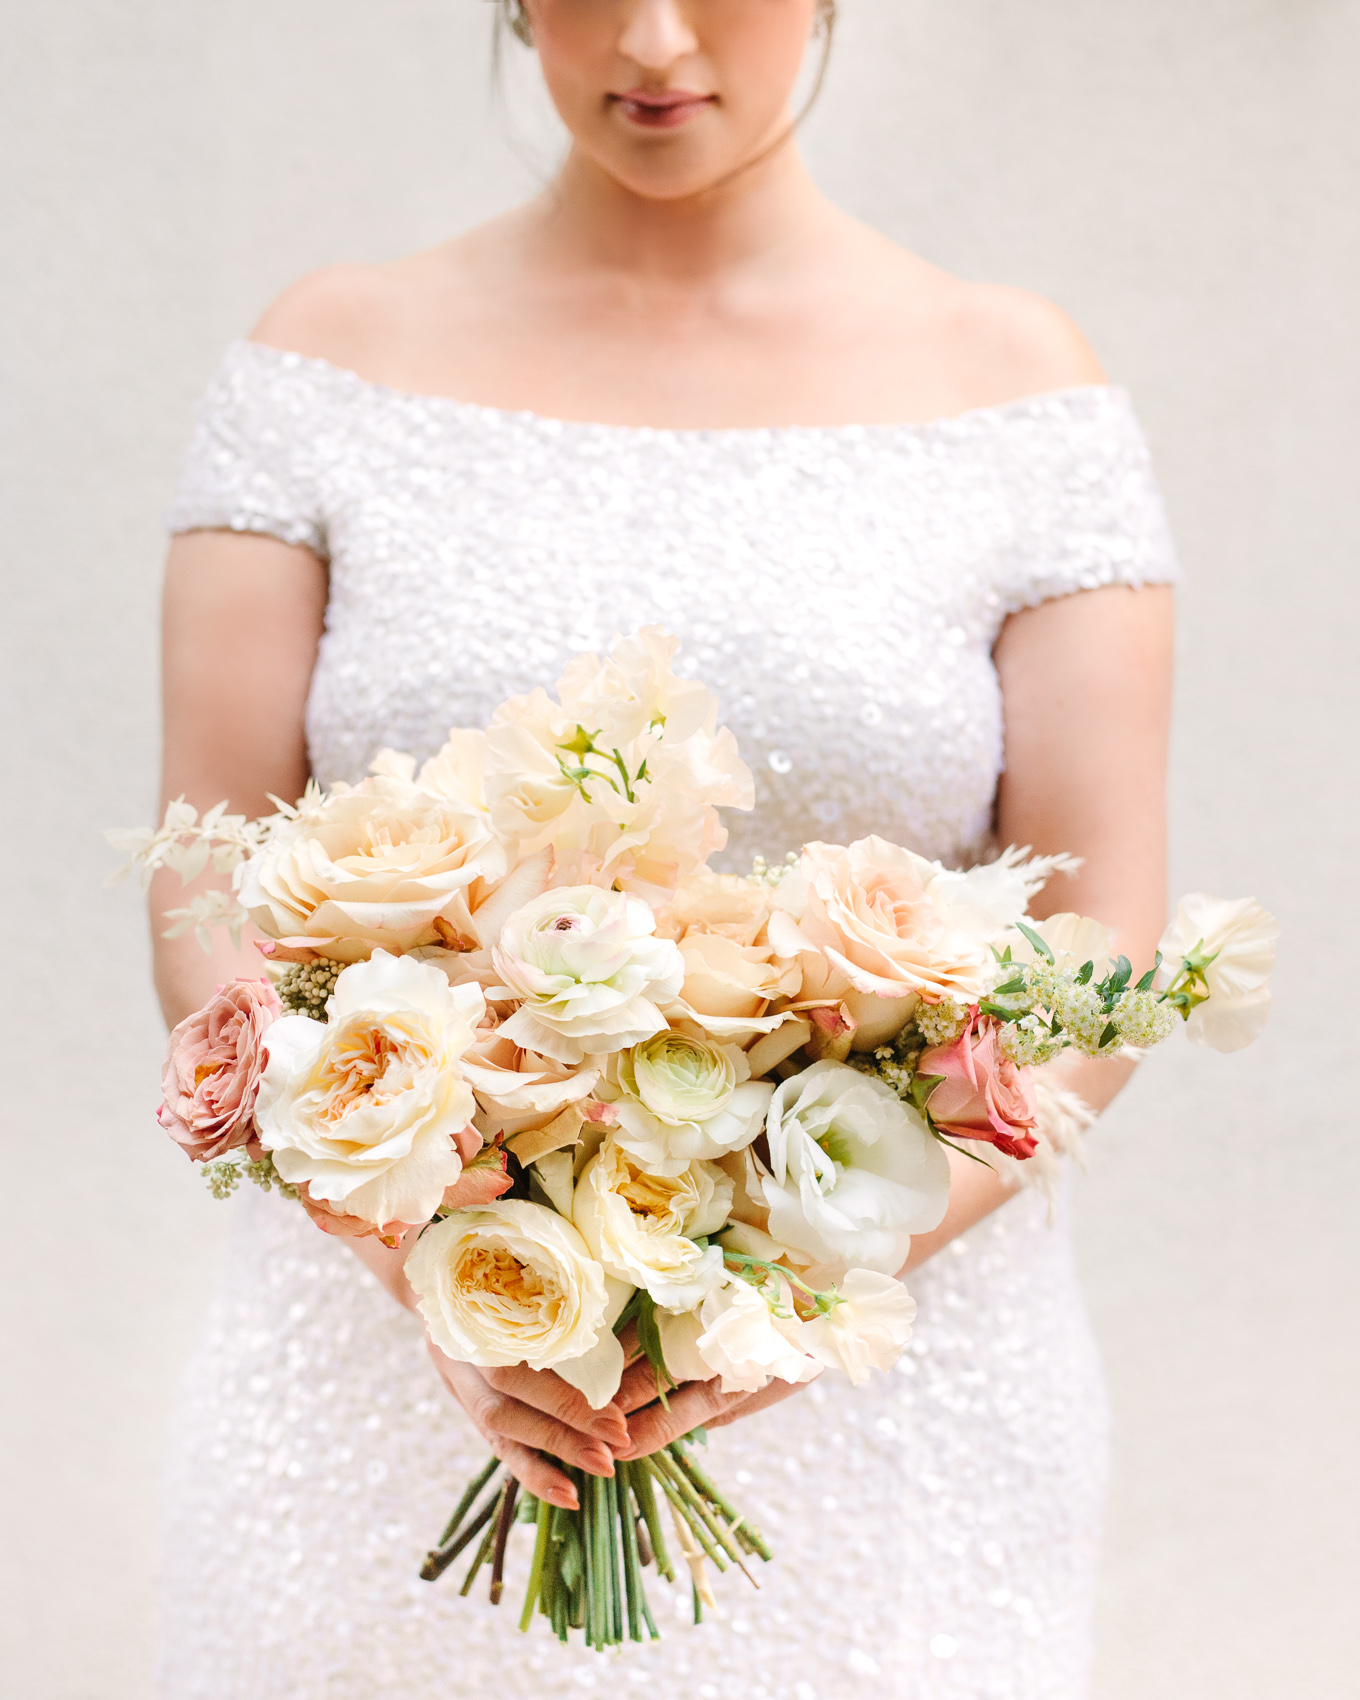 Neutral cream wedding bouquet | Beautiful bridal bouquet inspiration and advice | Colorful and elevated wedding photography for fun-loving couples in Southern California | #weddingflowers #weddingbouquet #bridebouquet #bouquetideas #uniquebouquet   Source: Mary Costa Photography | Los Angeles